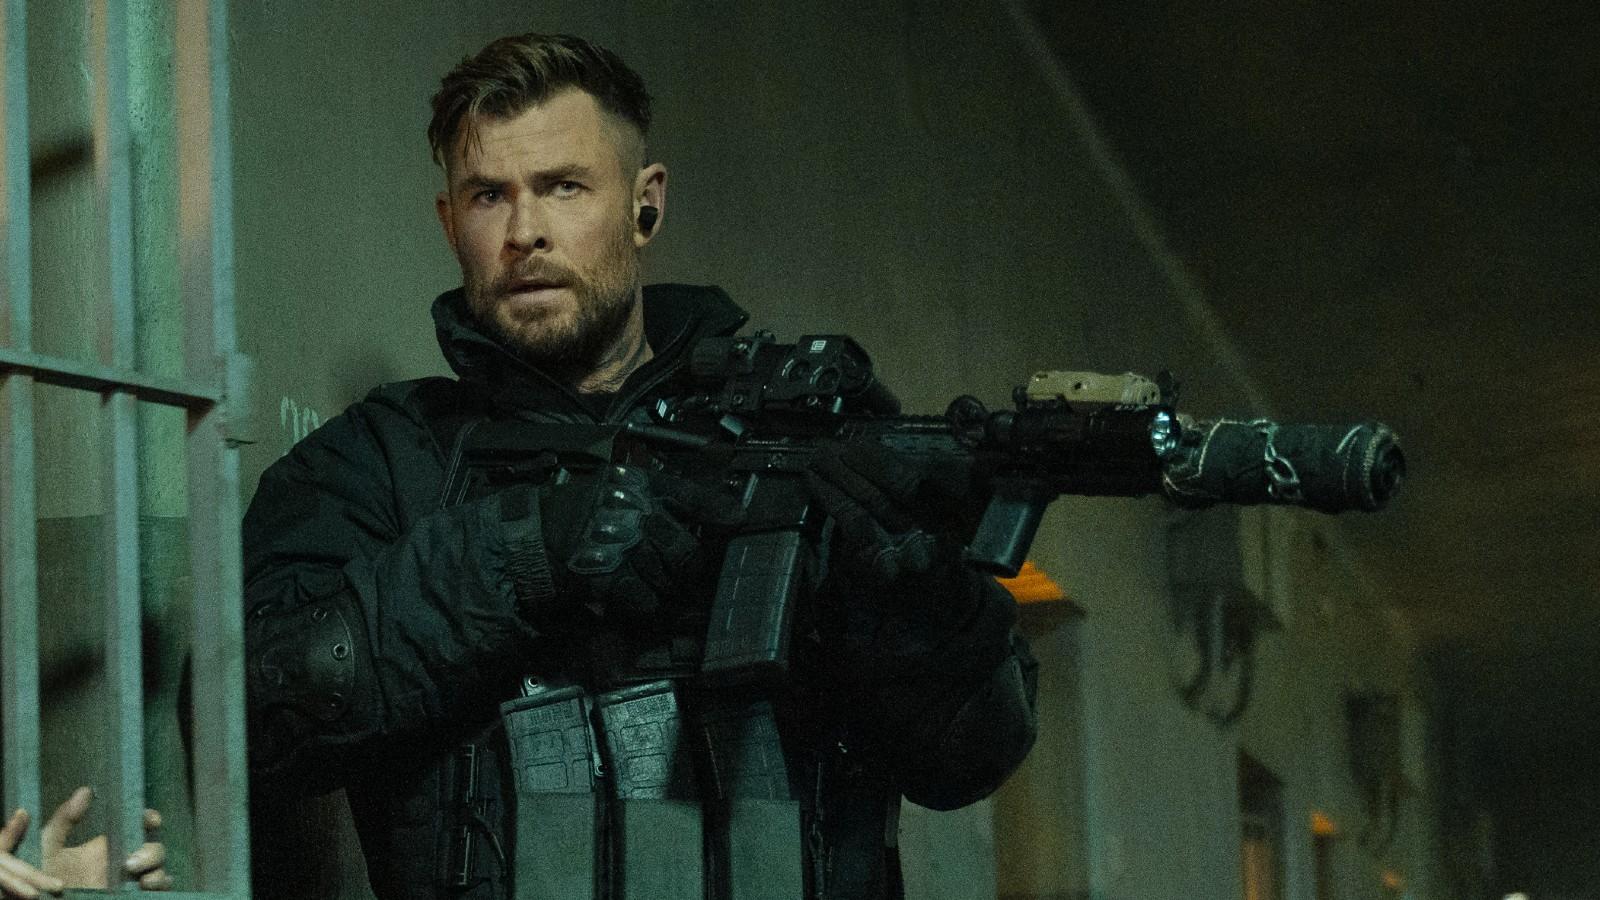 Extraction 2 Trailer: Check Out the Cast of the New Chris Hemsworth Movie -  Netflix Tudum